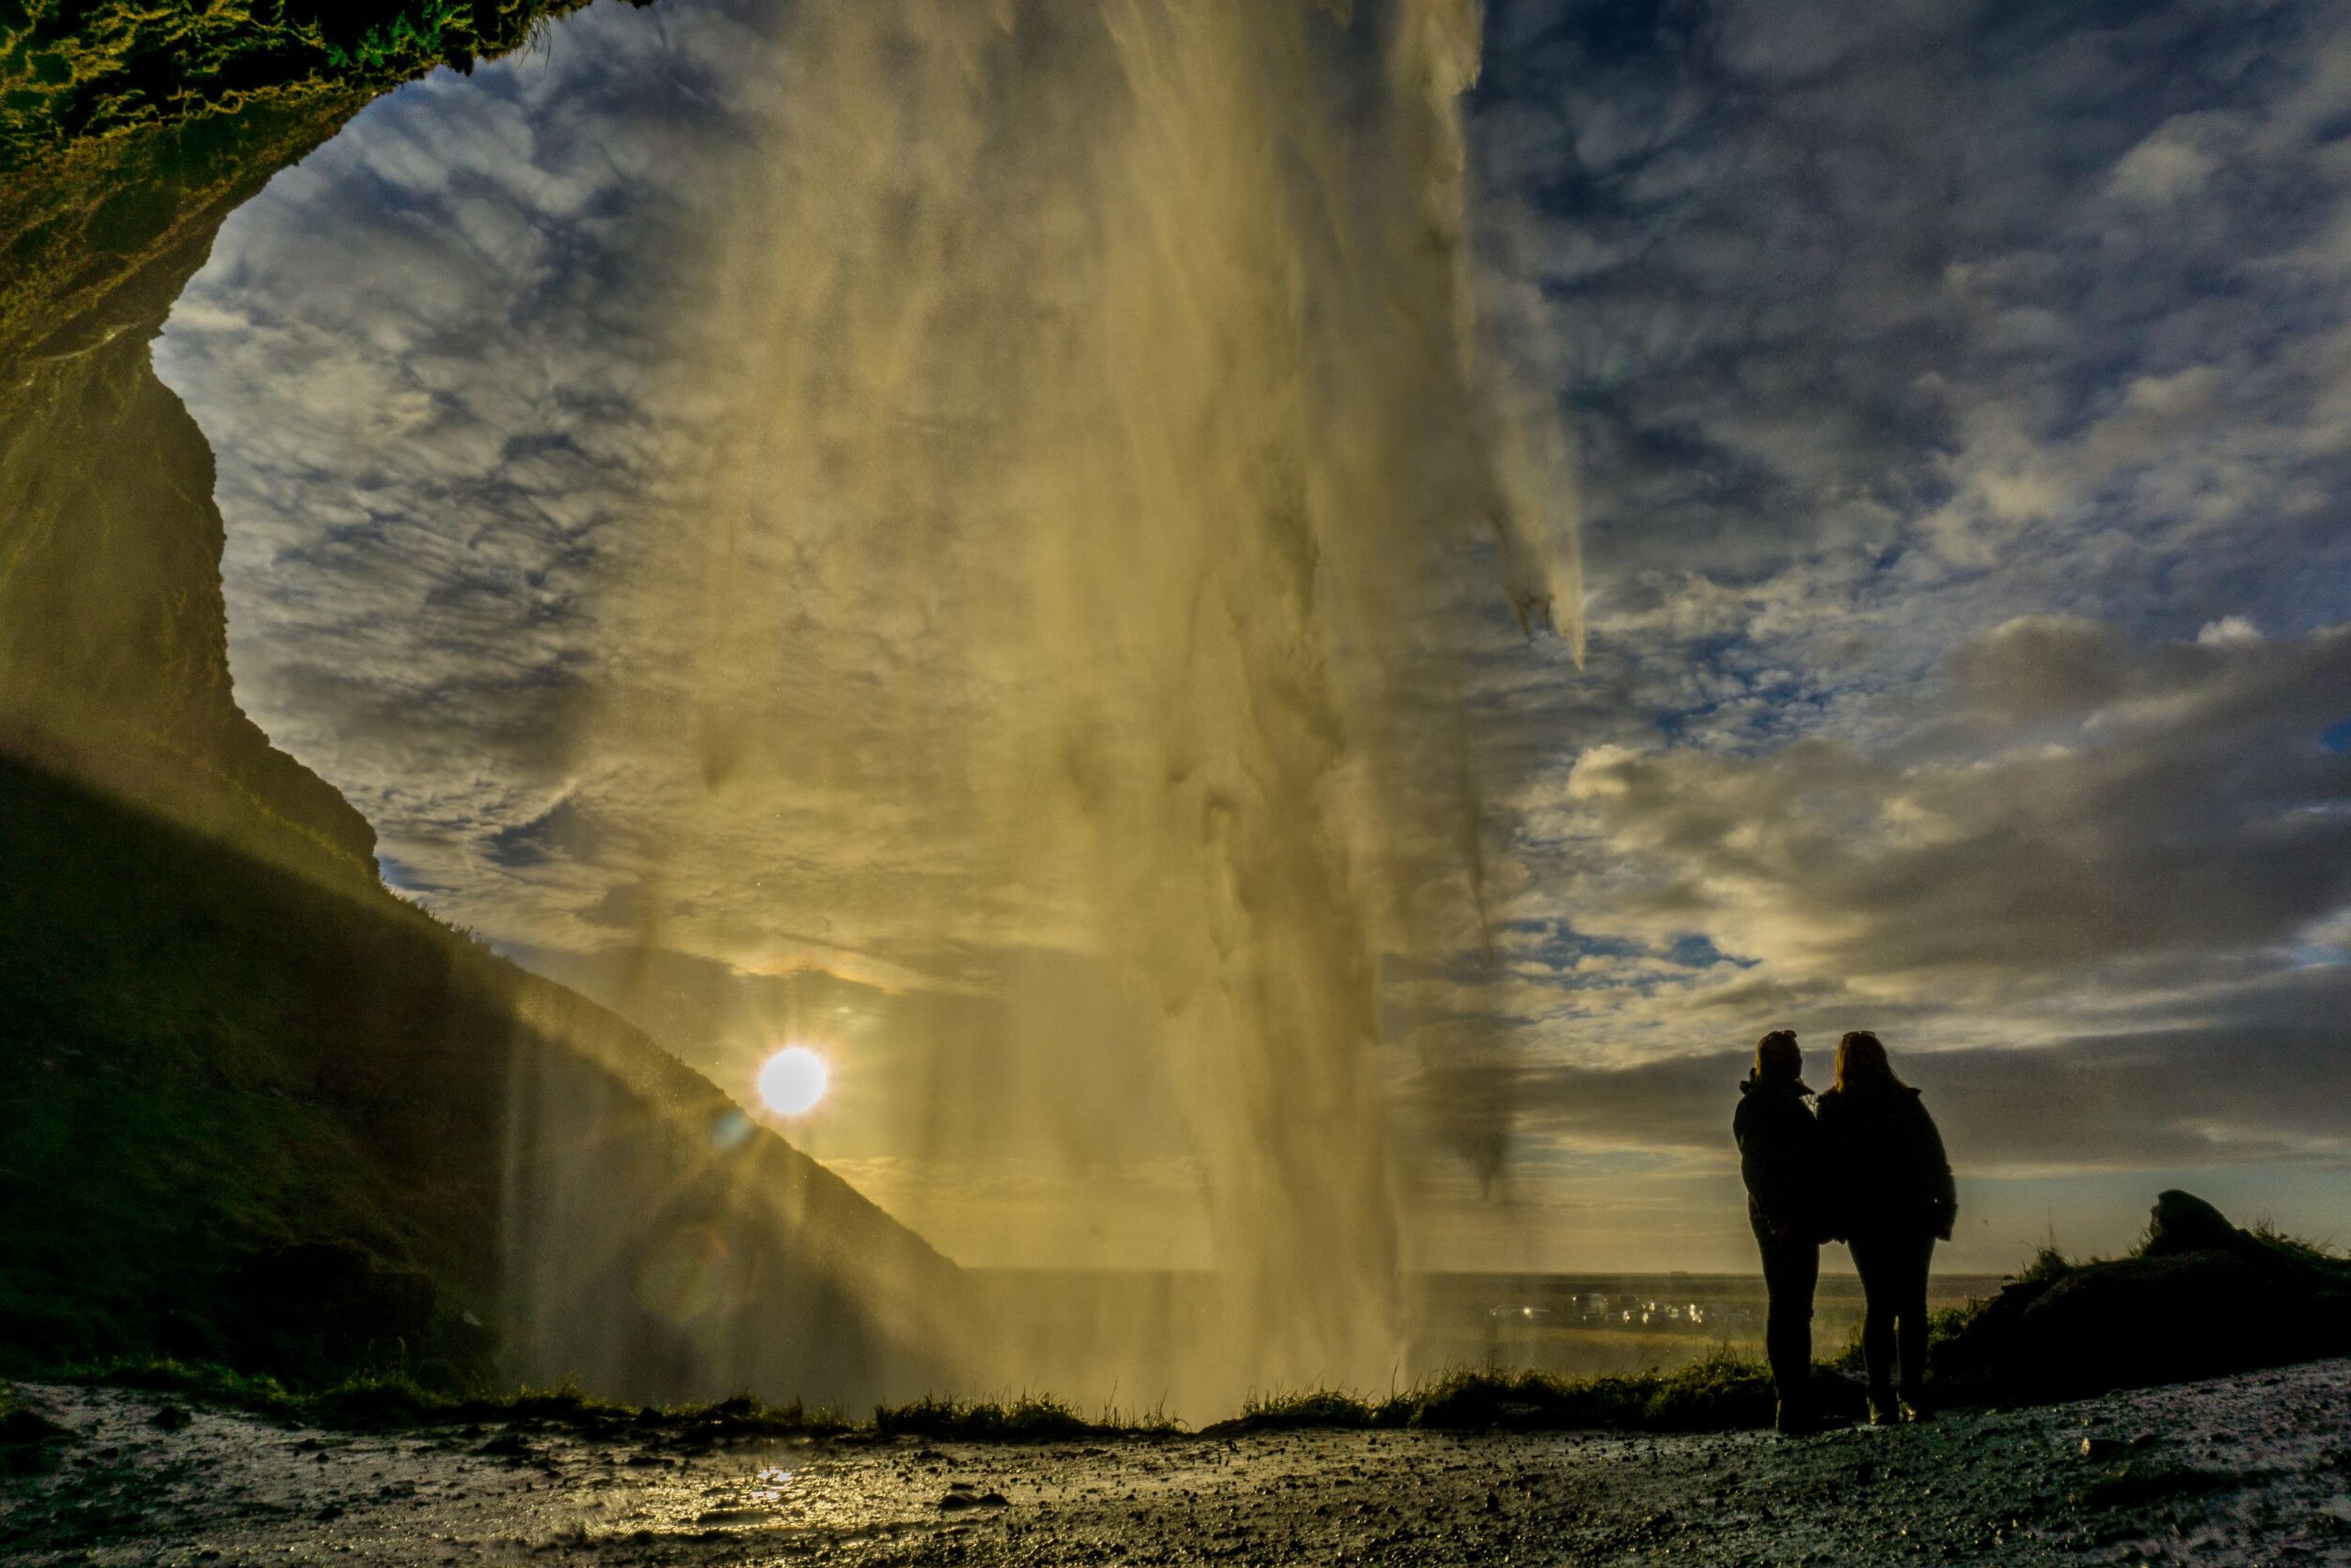 Two people standing behind the cascade with the sun shining trough it, creating a golden hue